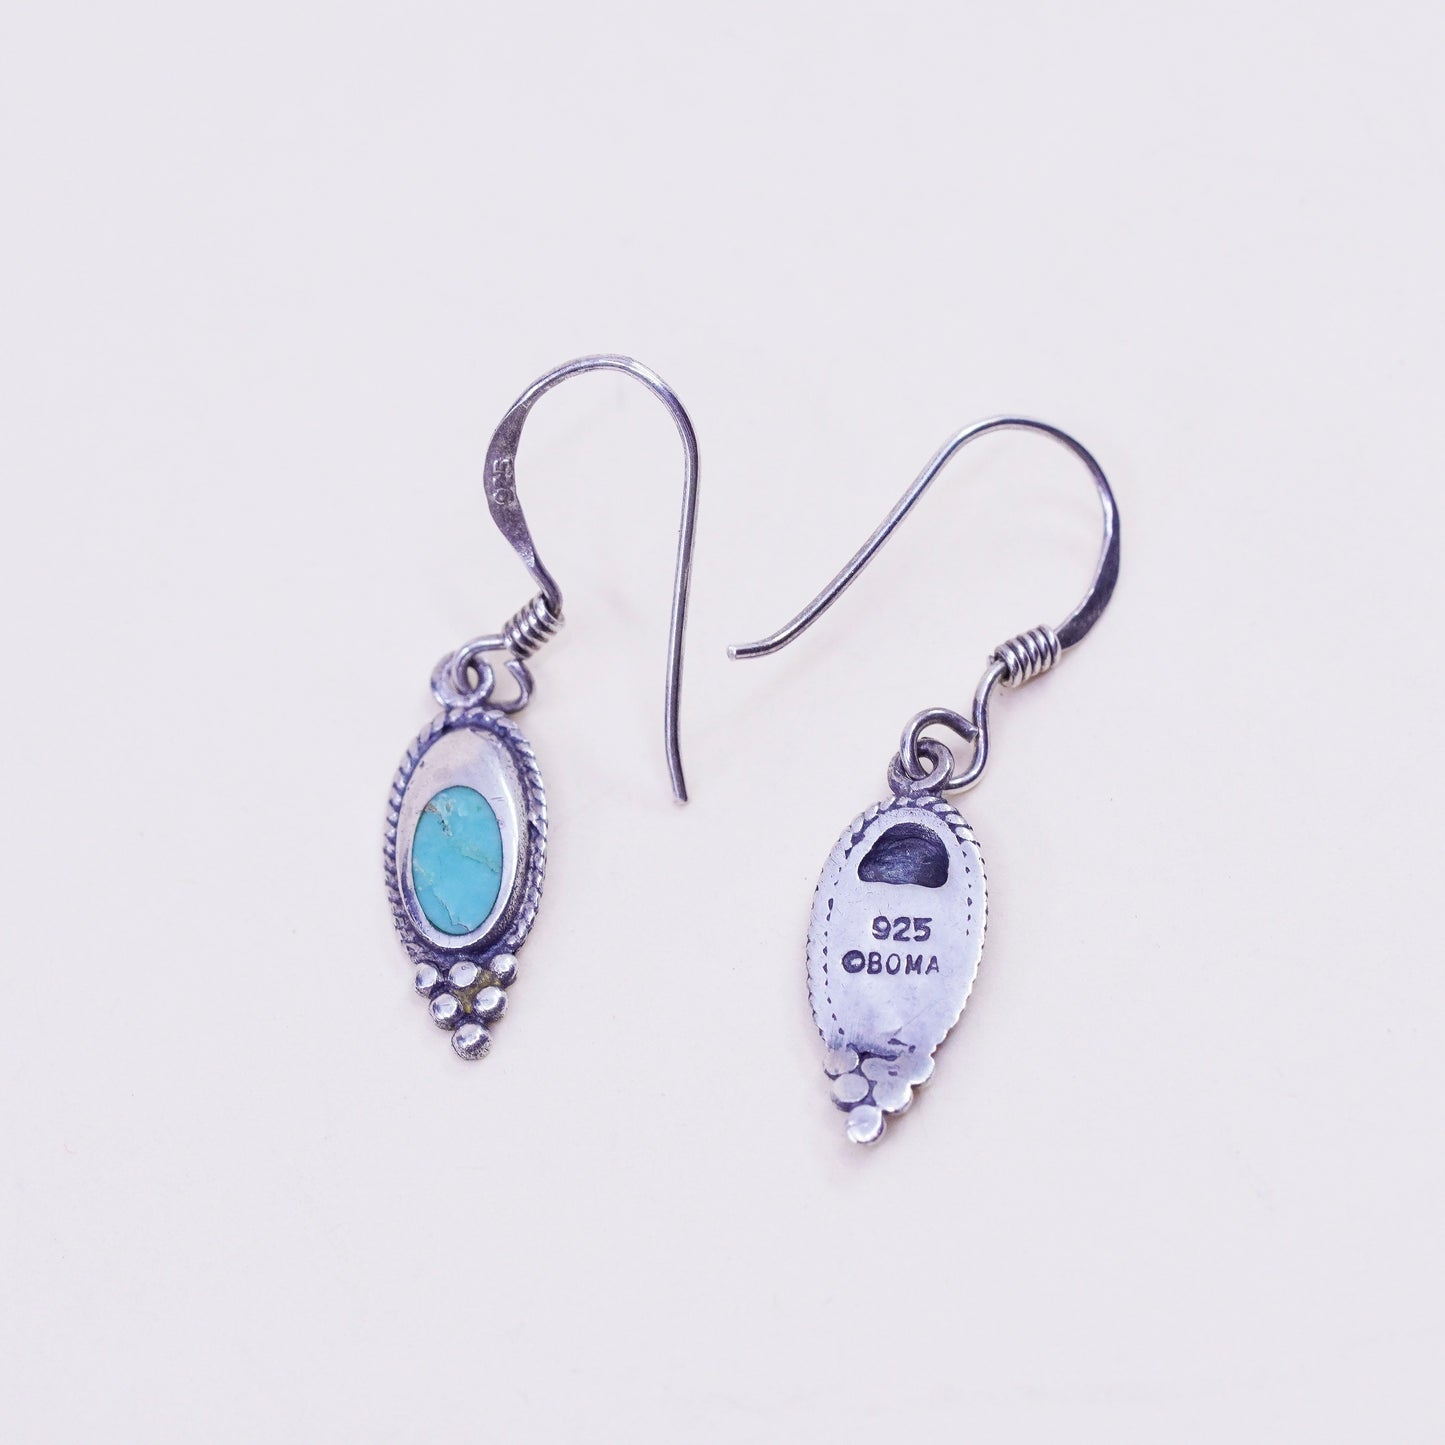 Vintage Boma sterling 925 silver handmade earrings with turquoise and beads